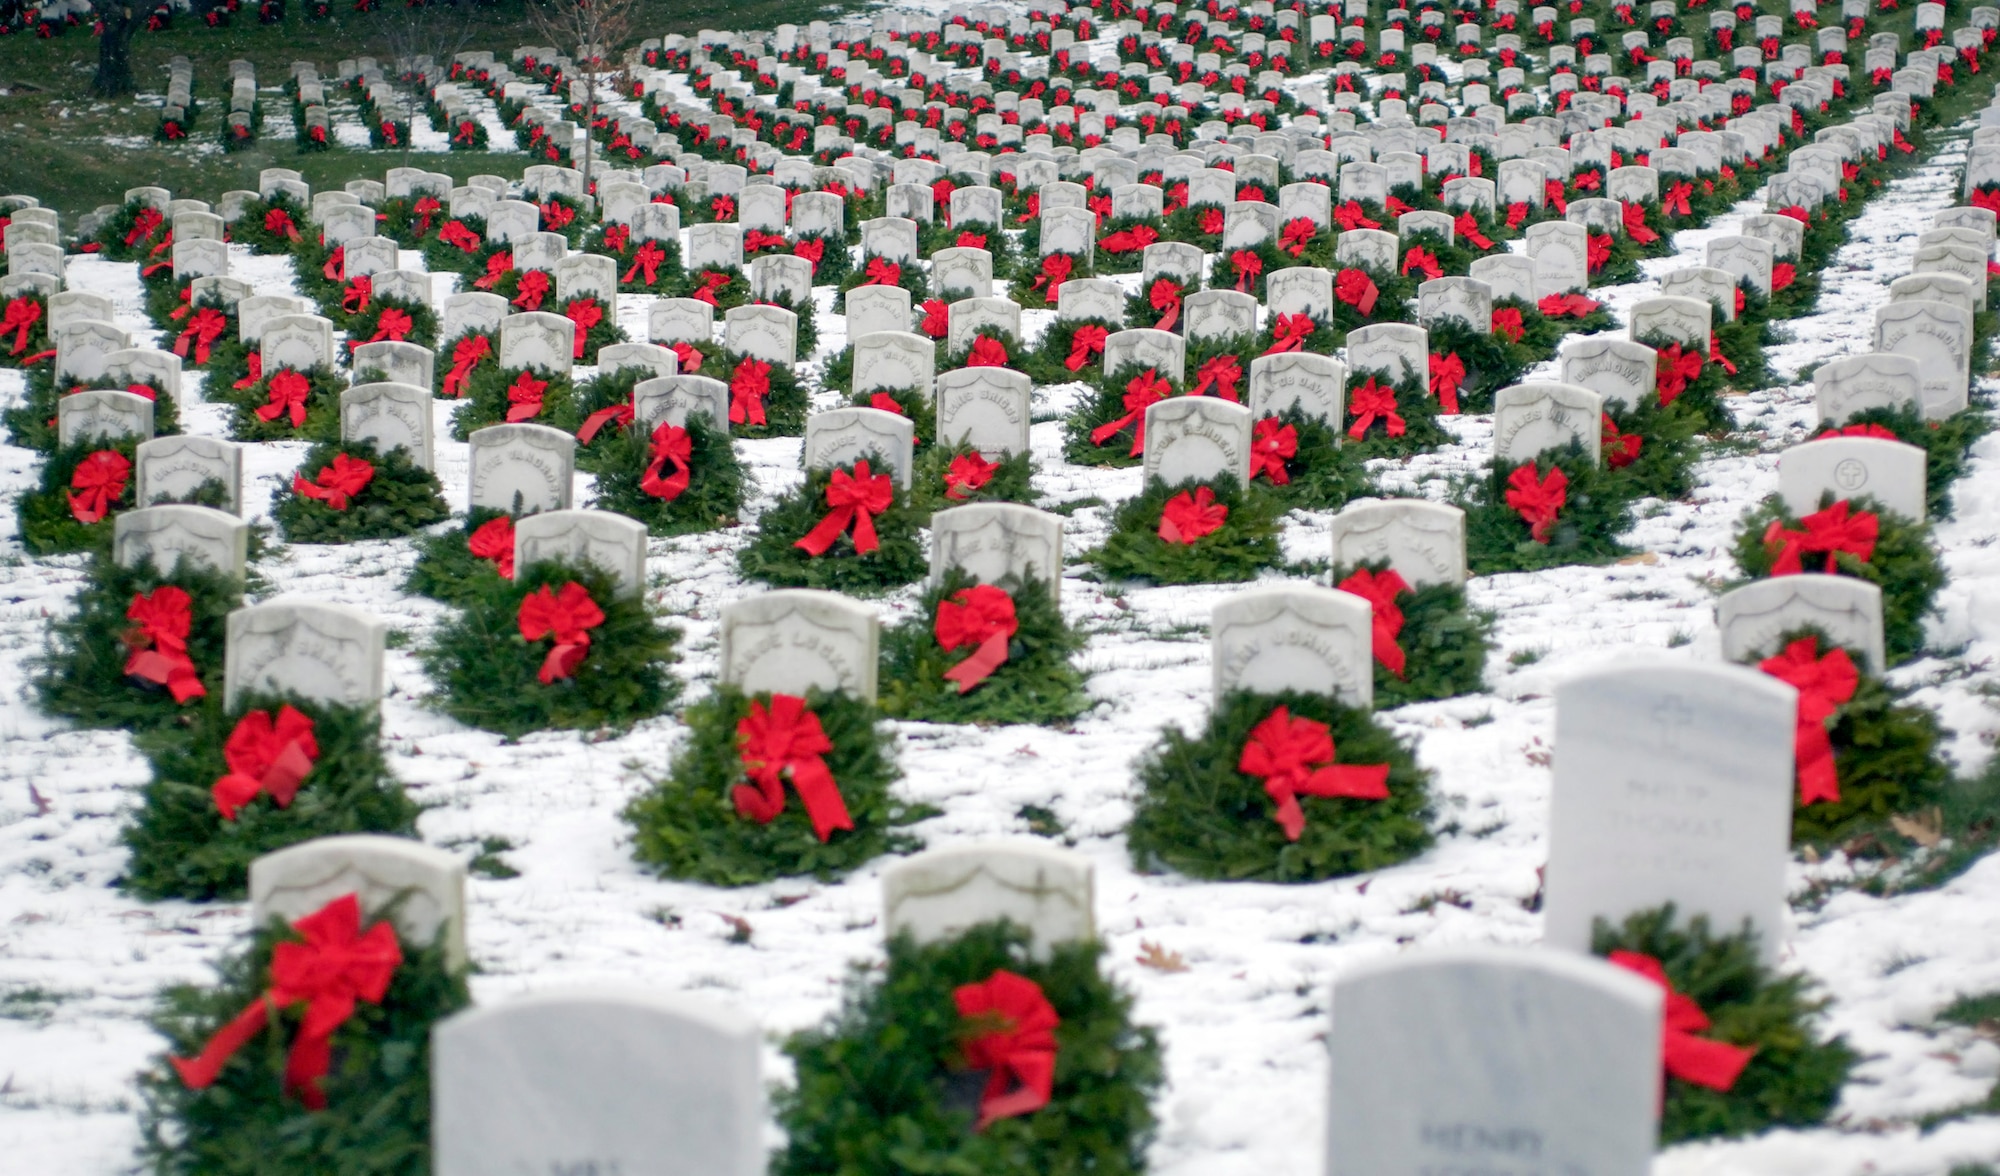 ARLINGTON, Va.-- Christmas wreaths adorn head stones at Arlington National Cemetery.  The 14th annual wreath-laying event is the result of Worcester Wreath Company's owner Morrill Worcester's childhood dream of doing something to honor those laid to rest.  (U.S. Air Force photo by Master Sgt. Jim Varhegyi)